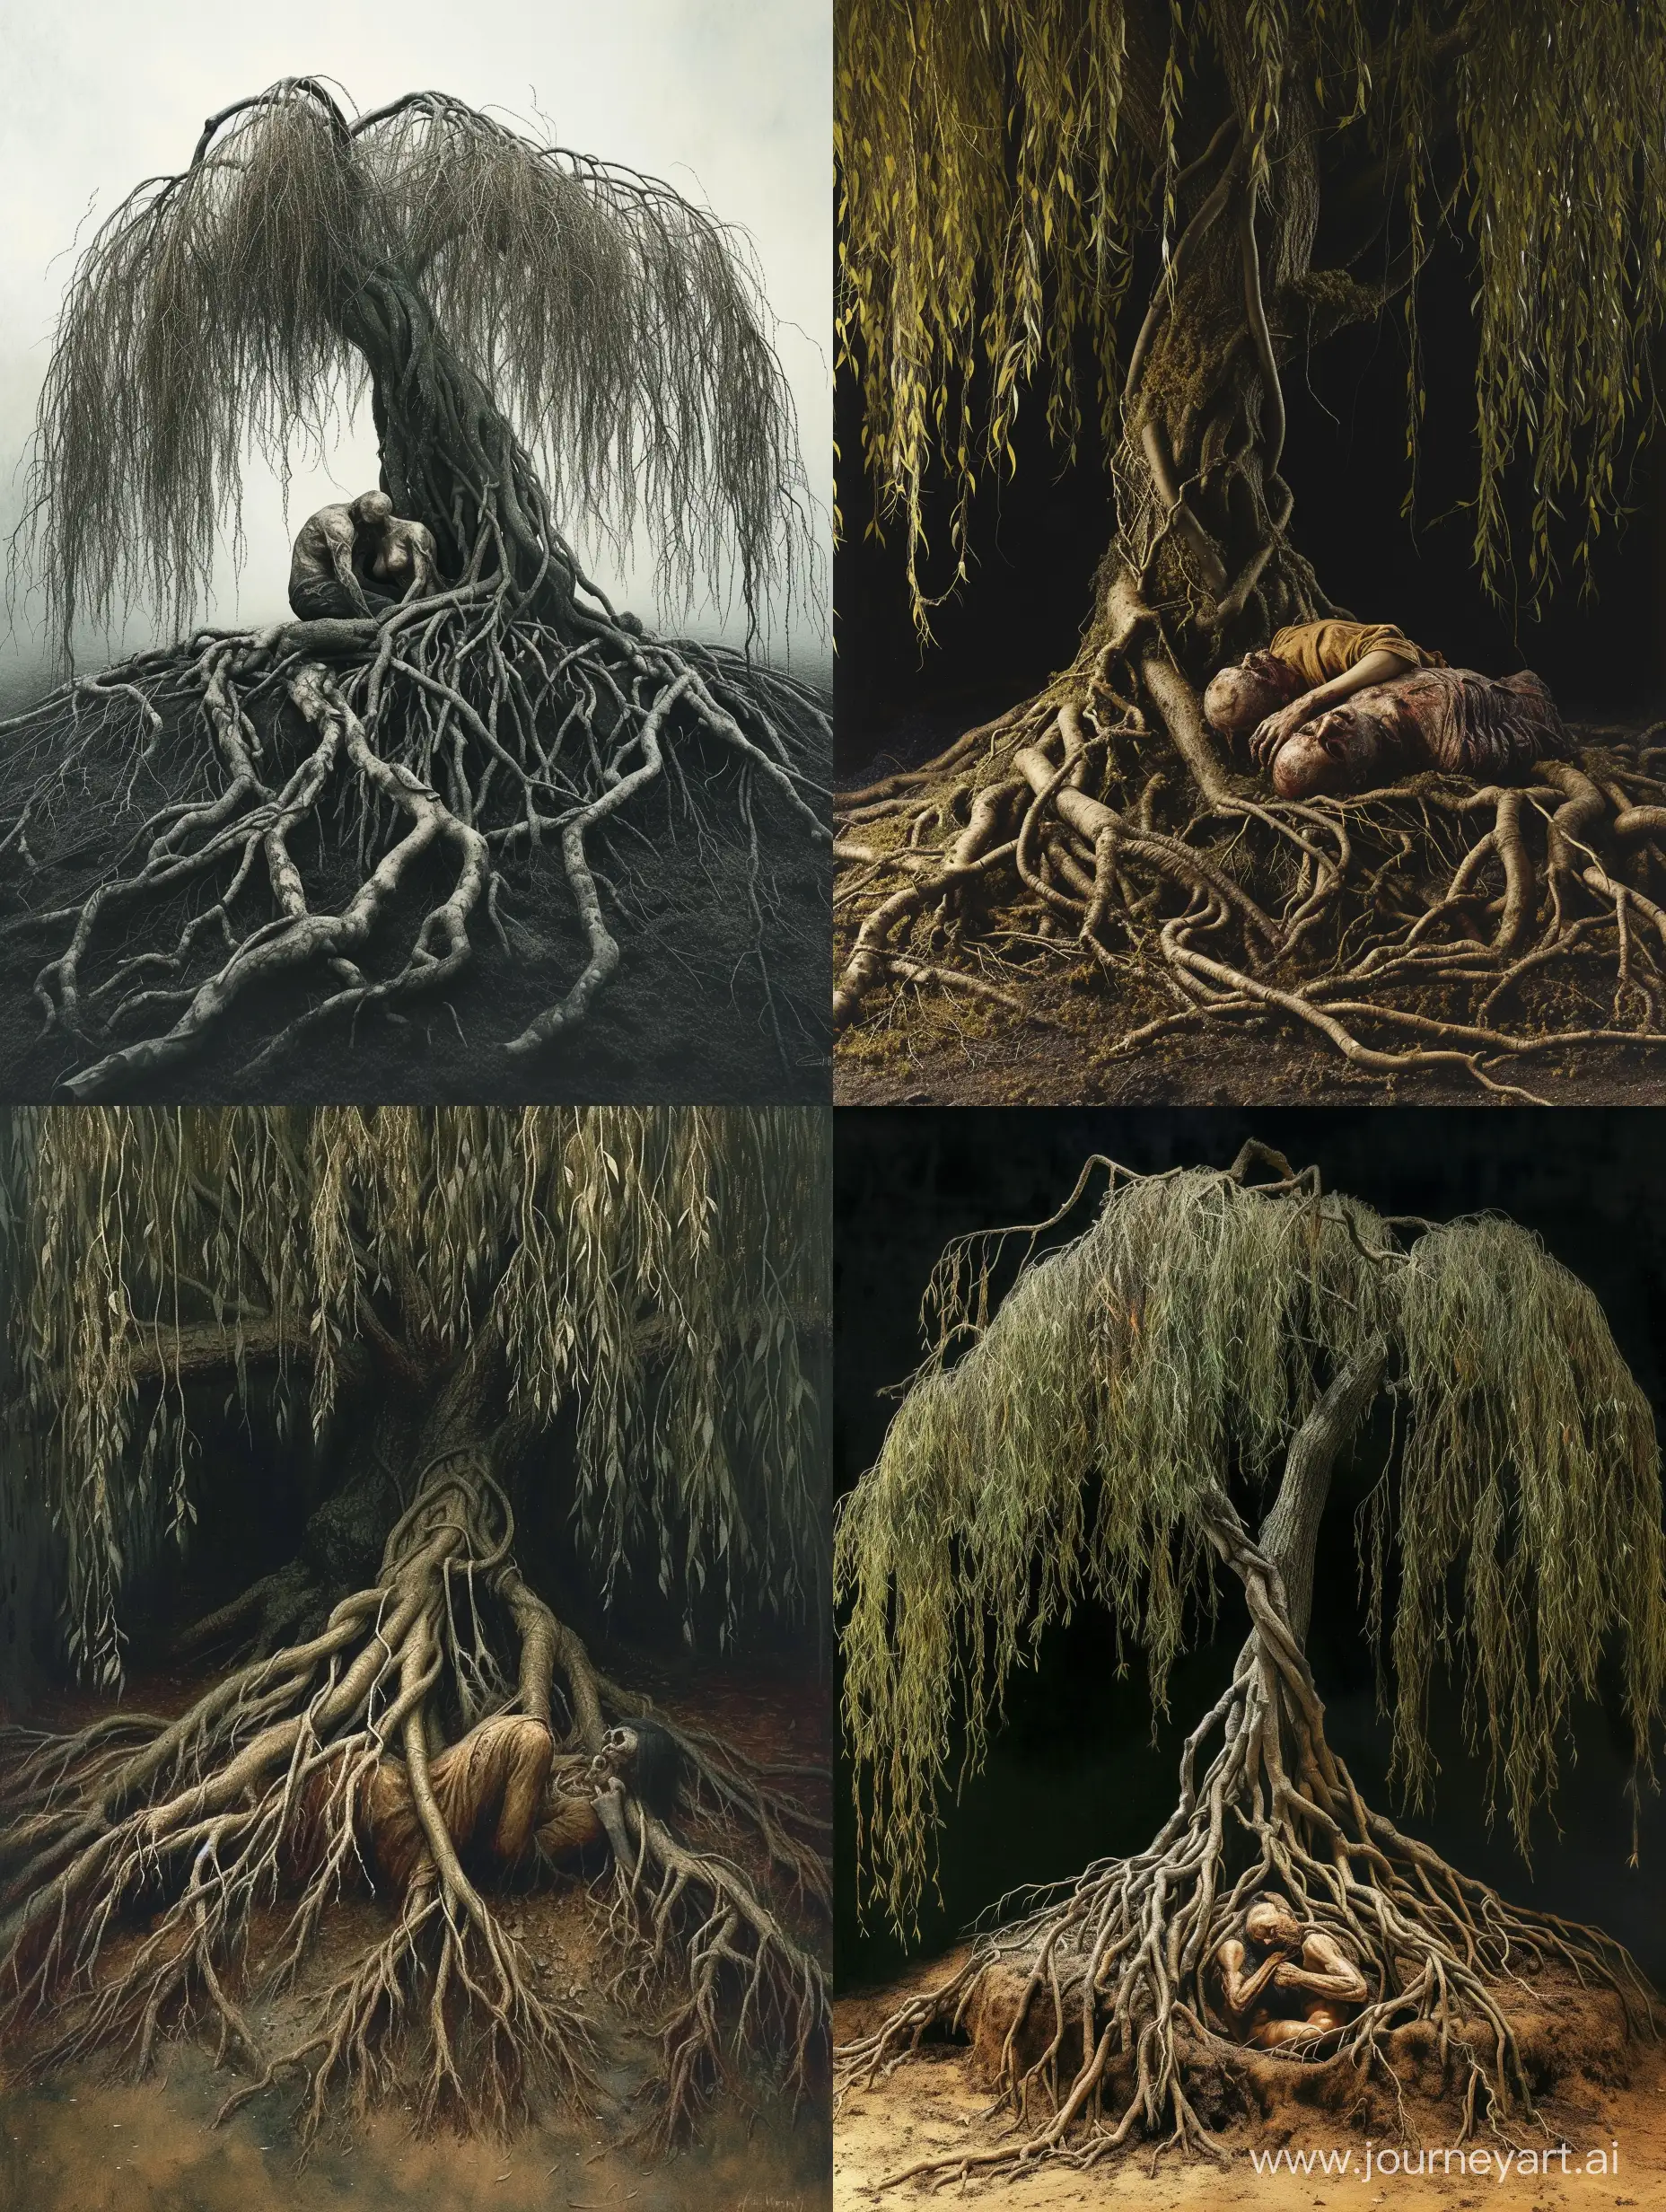 A weeping willow tree, branches cascading downward, large exposed roots sprawl across the ground, two decaying bodies, a man and a woman, locked in a loving embrace, within the tangled roots slowly returning to the earth. Their bodies are becoming intertwined with the roots, saturated, attention to detail, dark aesthetic, morbid core